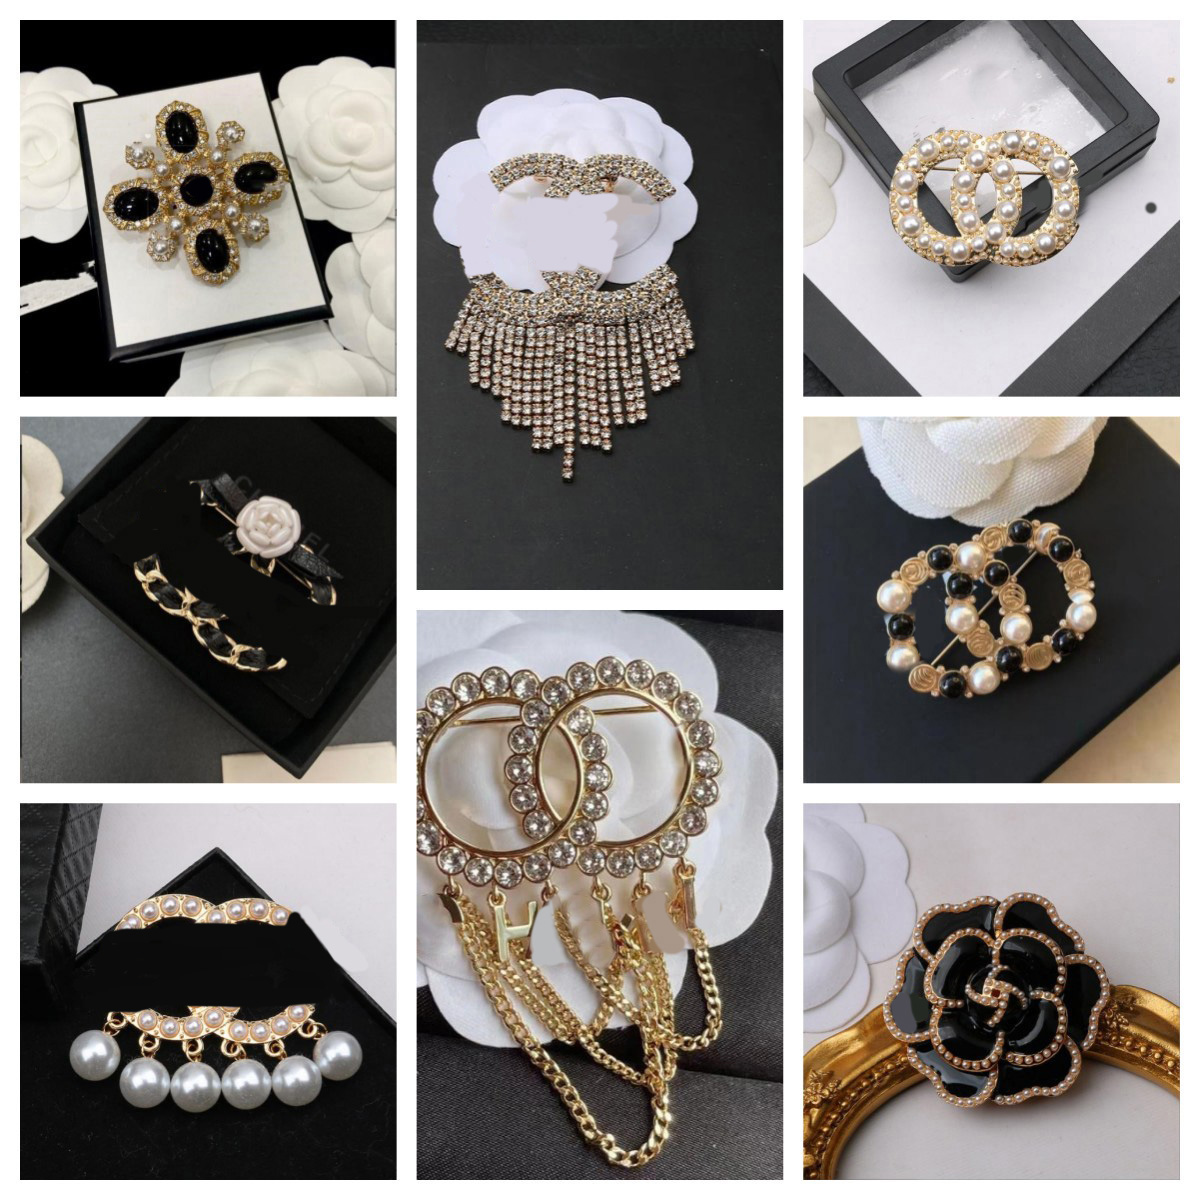 

Newest Luxury Brand Desinger Brooch Women Crystal Rhinestone Pearl Letter Brooches Suit Pin Fashion Gifts Jewelry Accessories High Quality 20style